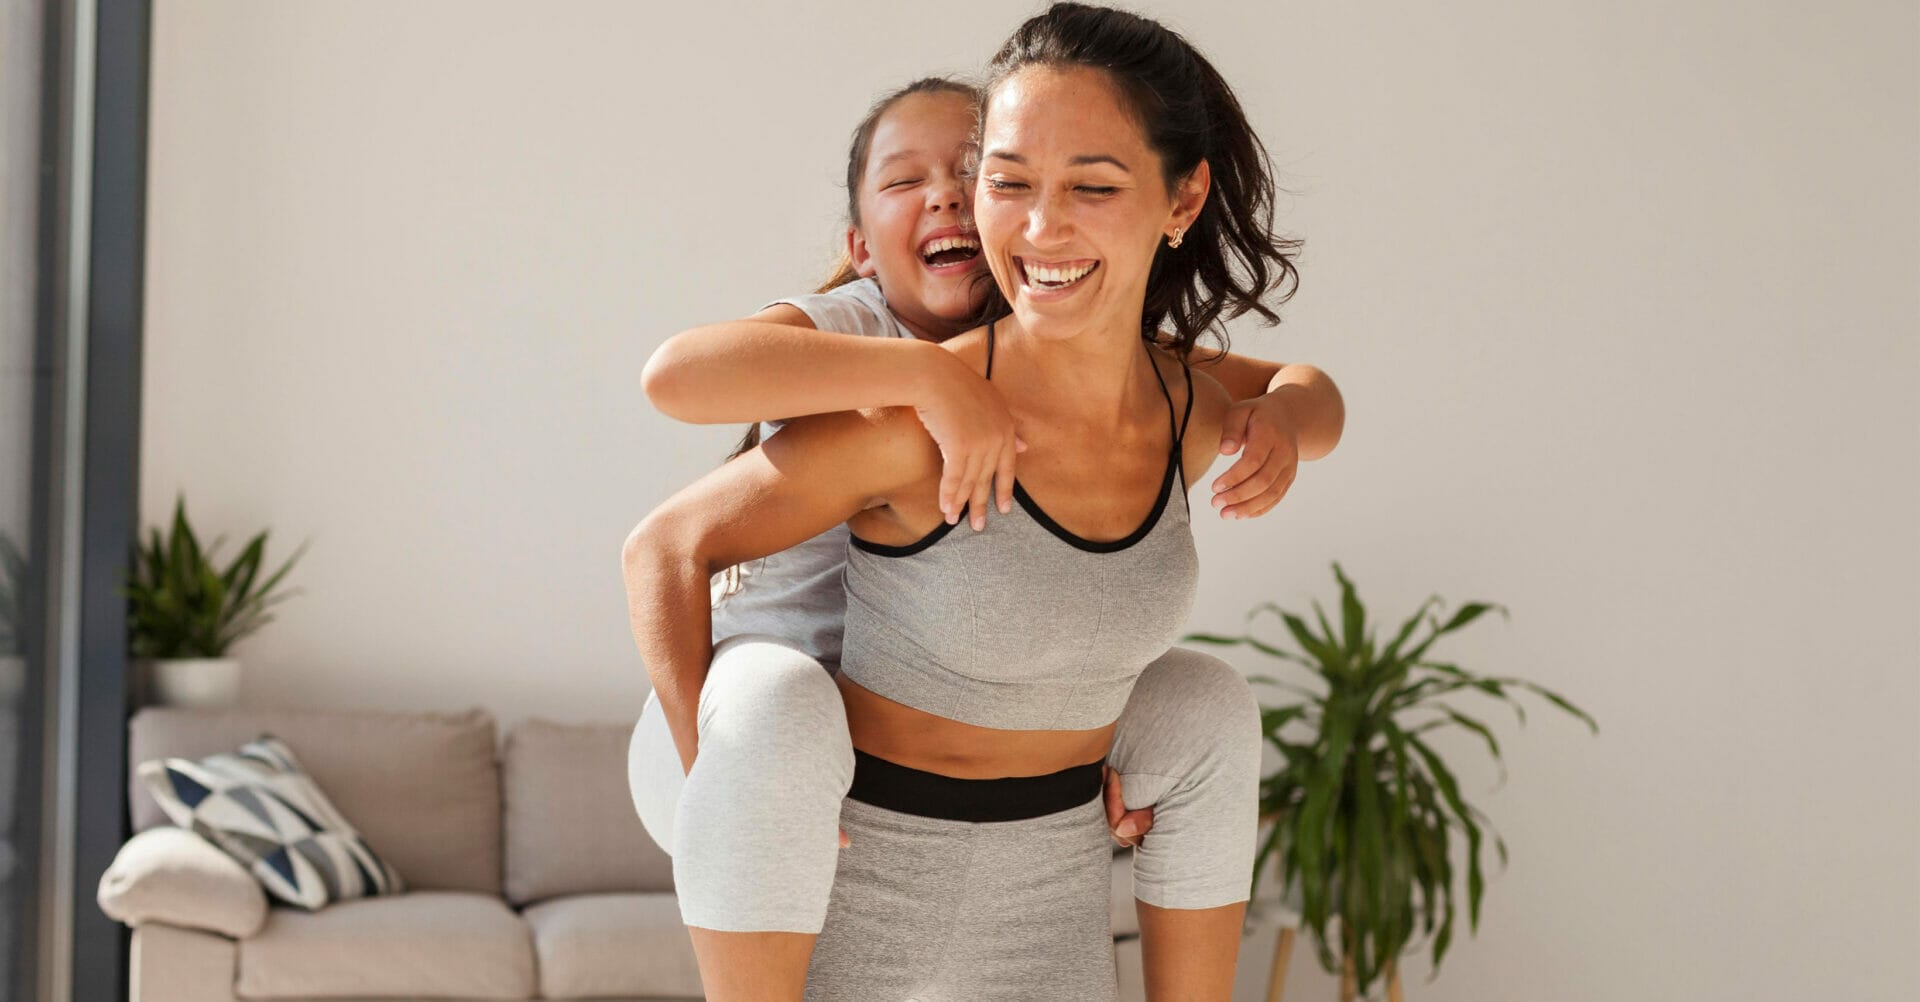 Busy mom and daughter engage in piggyback exercise at home.